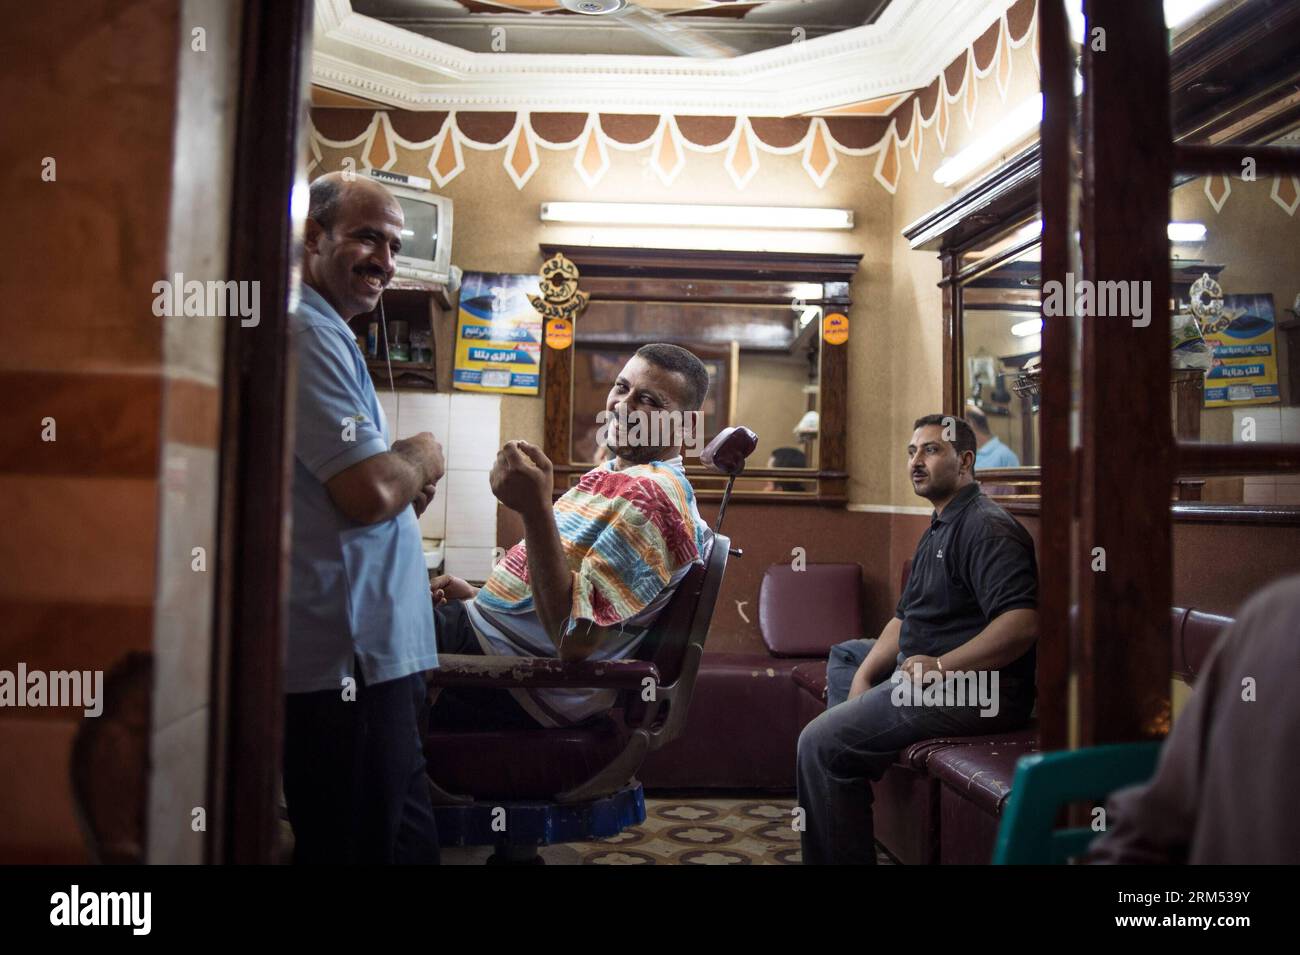 Bildnummer: 60561980  Datum: 03.10.2013  Copyright: imago/Xinhua Residents chat at a barber shop in Shibin Al Kawm, capital of Monufia Governorate, Egypt, on Oct. 3, 2013. Monufia is a mainly agricultural governorate in Egypt, located to the north of Cairo. It is known particularly as the birthplace of two Egyptian presidents, Anwar Sadat and Hosni Mubarak. (Xinhua/Pan Chaoyue) EGYPT-MONUFIA-DAILY LIFE PUBLICATIONxNOTxINxCHN xas x0x 2013 quer     60561980 Date 03 10 2013 Copyright Imago XINHUA Residents Chat AT a Barber Shop in  Al  Capital of  Governorate Egypt ON OCT 3 2013  IS a mainly Agri Stock Photo